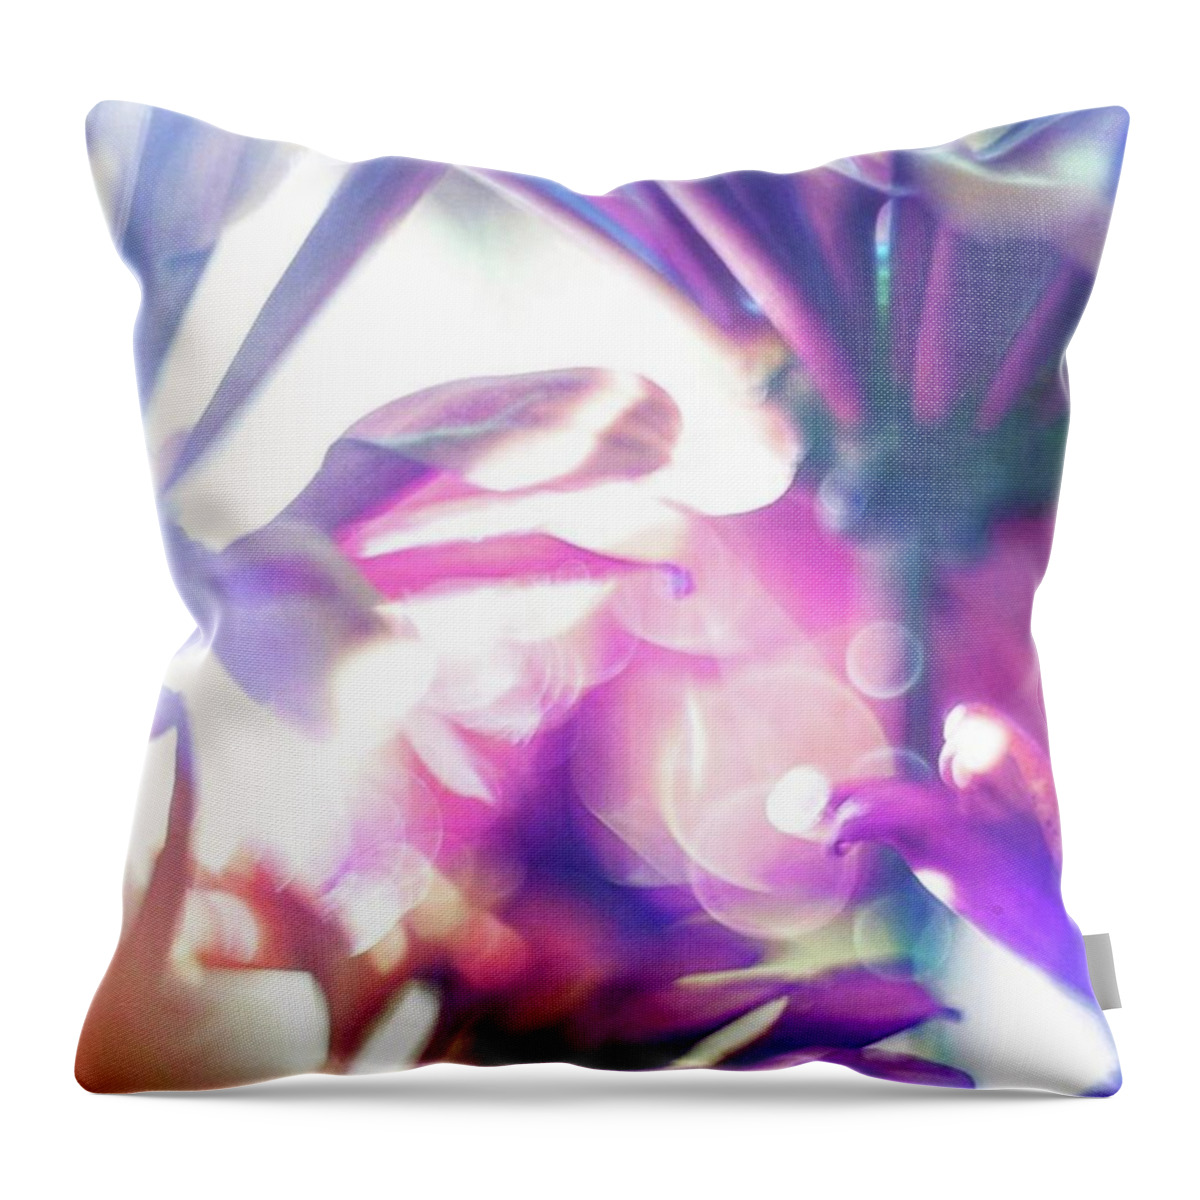 Pink Throw Pillow featuring the photograph Floral Abstract by Aleck Cartwright